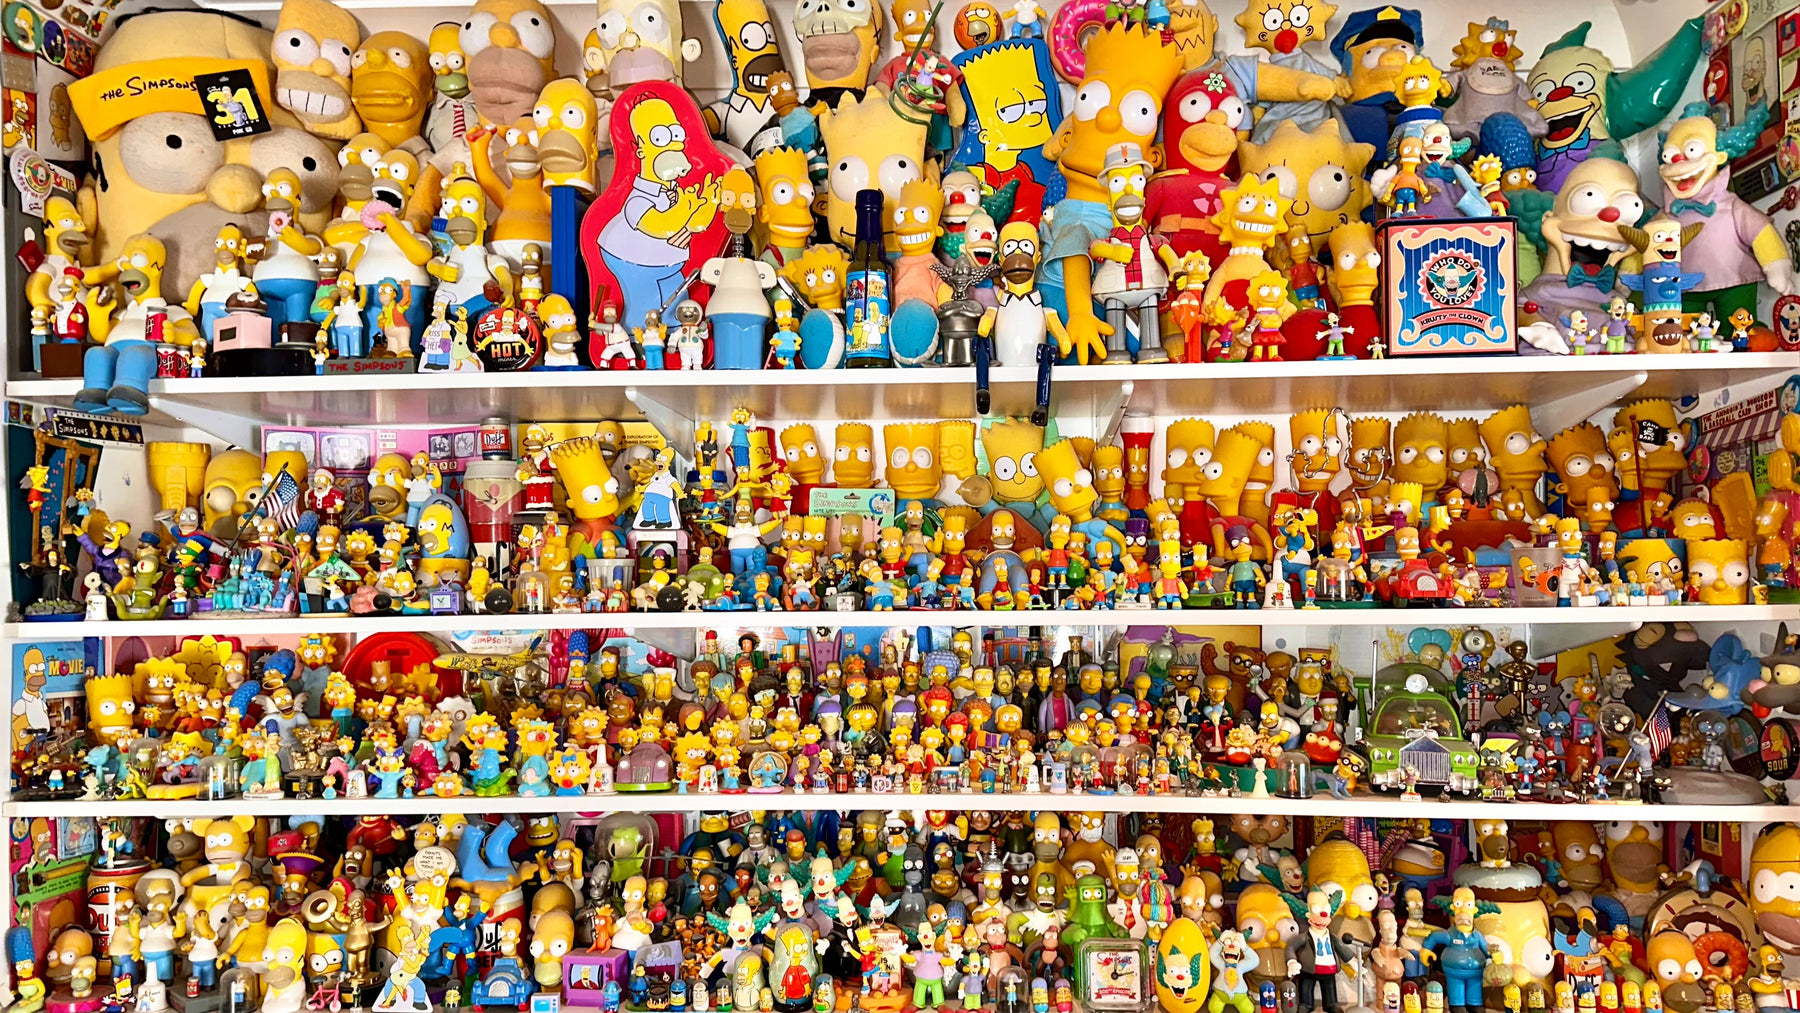 Lots of The Simpsons figurines